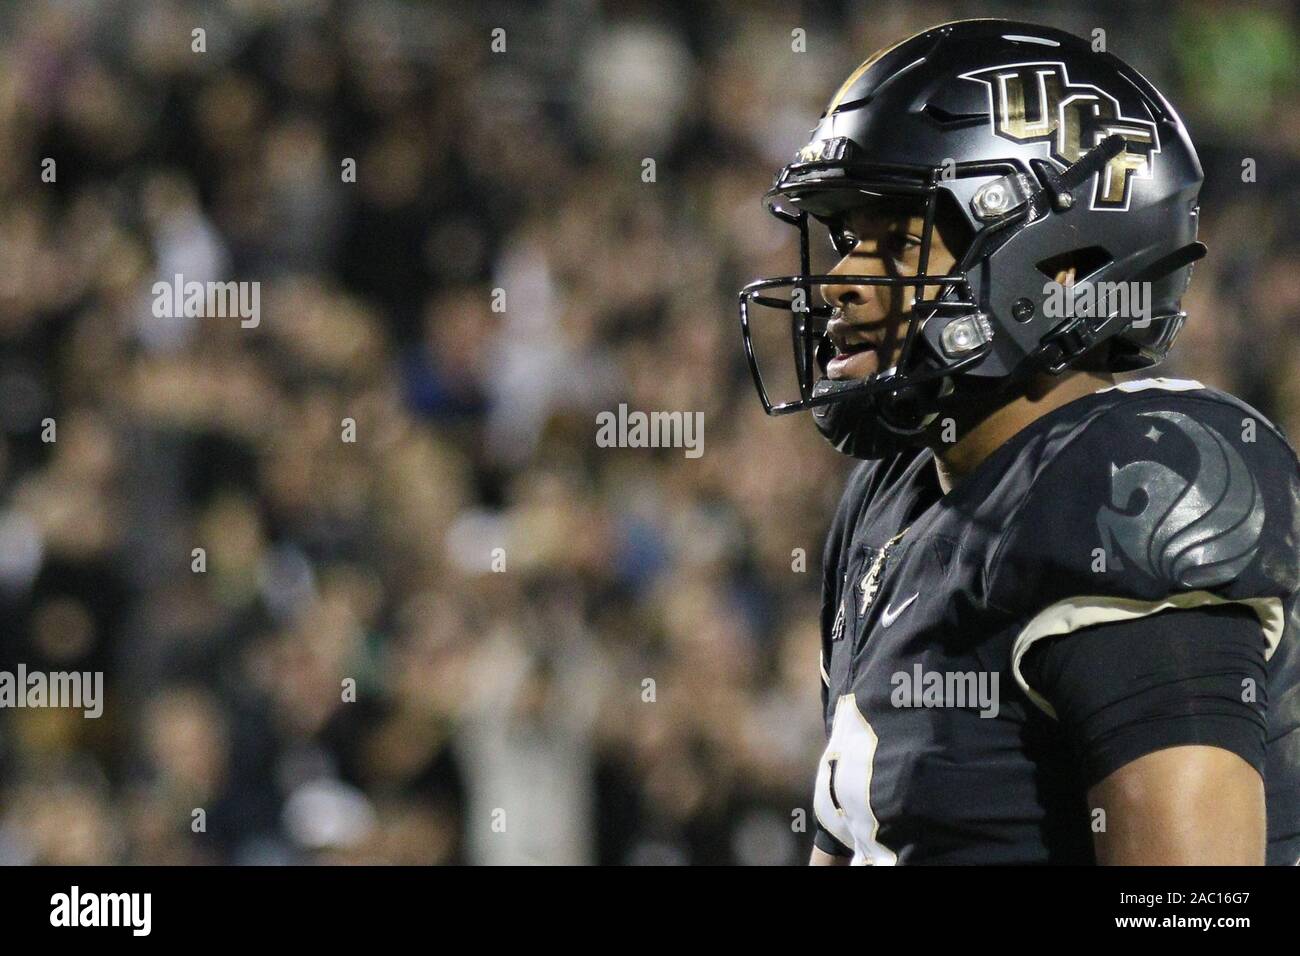 November 29, 2019: UCF Knights quarterback Darriel Mack Jr. (8) looks on after scoring a touchdown during the NCAA football game between the South Florida Bulls and the UCF Knights held at Spectrum Stadium in Orlando, Florida. Andrew J. Kramer/Cal Sport Media Stock Photo